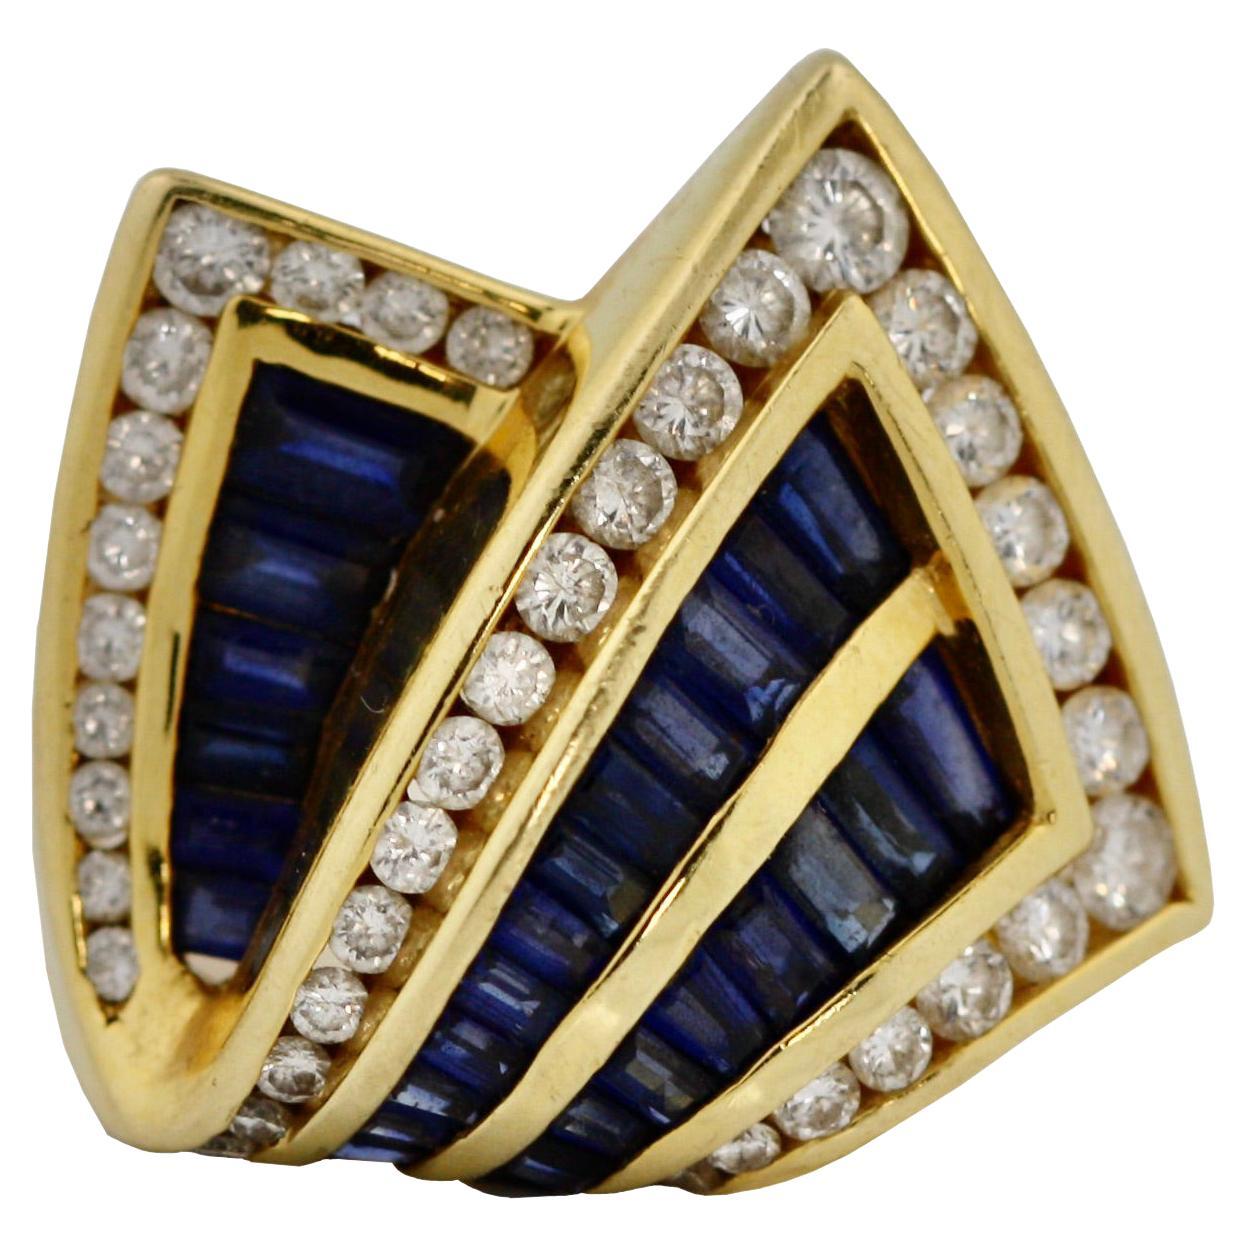 Charles Krypell 18K Gold, Sapphire and Diamond Ring